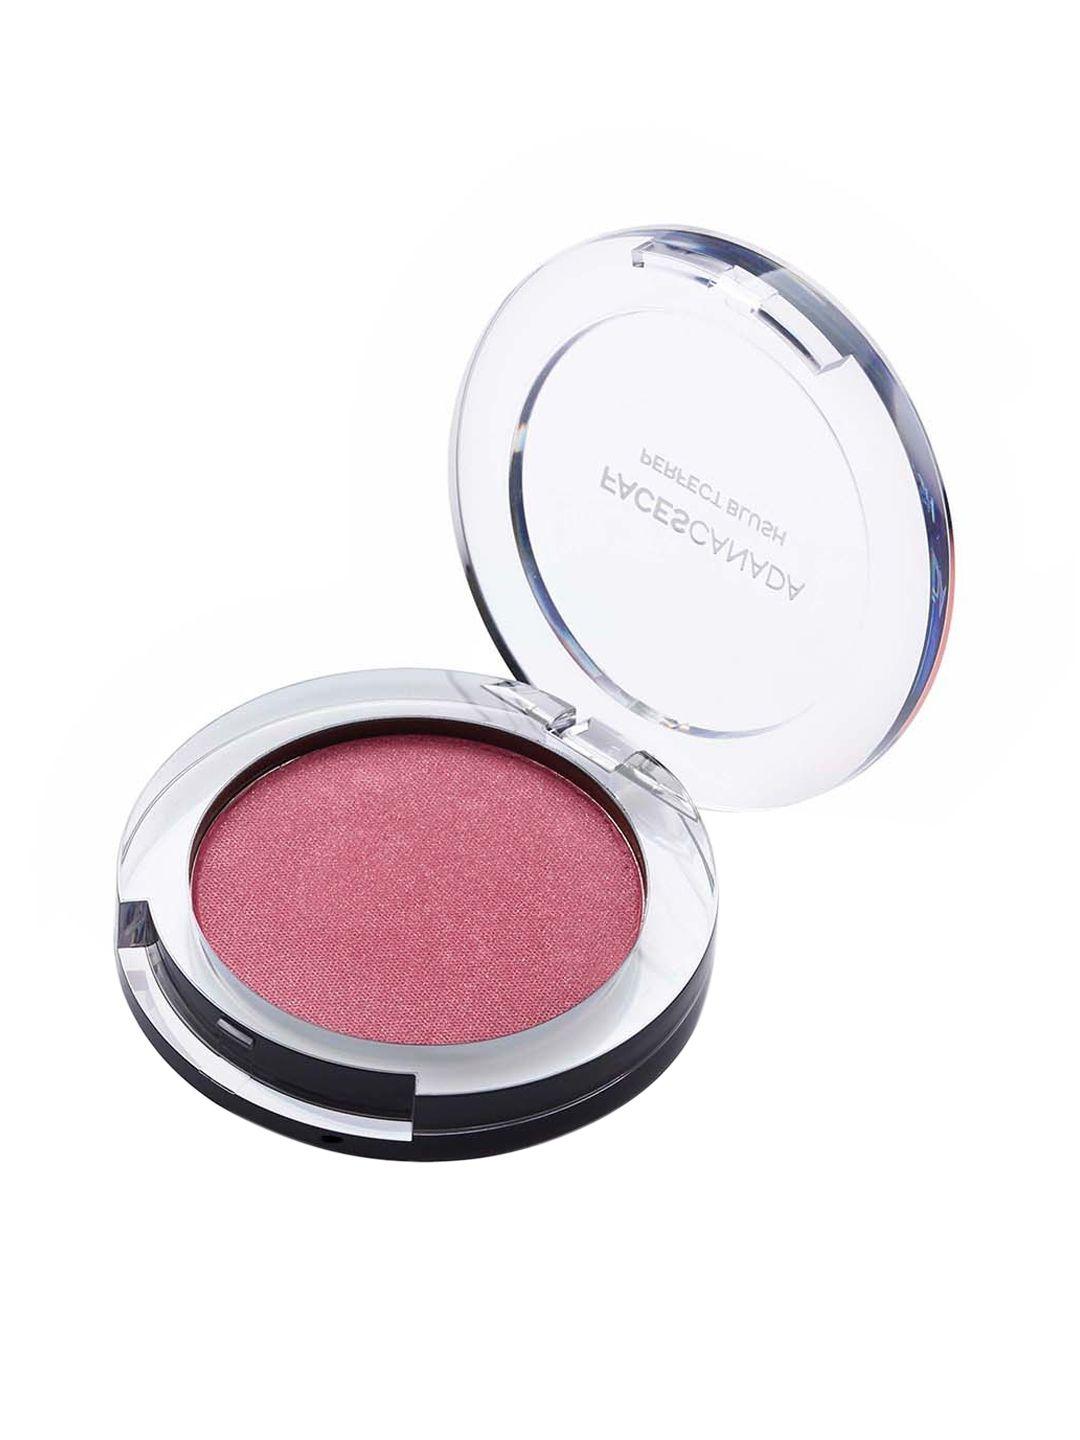 faces canada perfect blush - silky smooth texture - 5g - hot pink 02